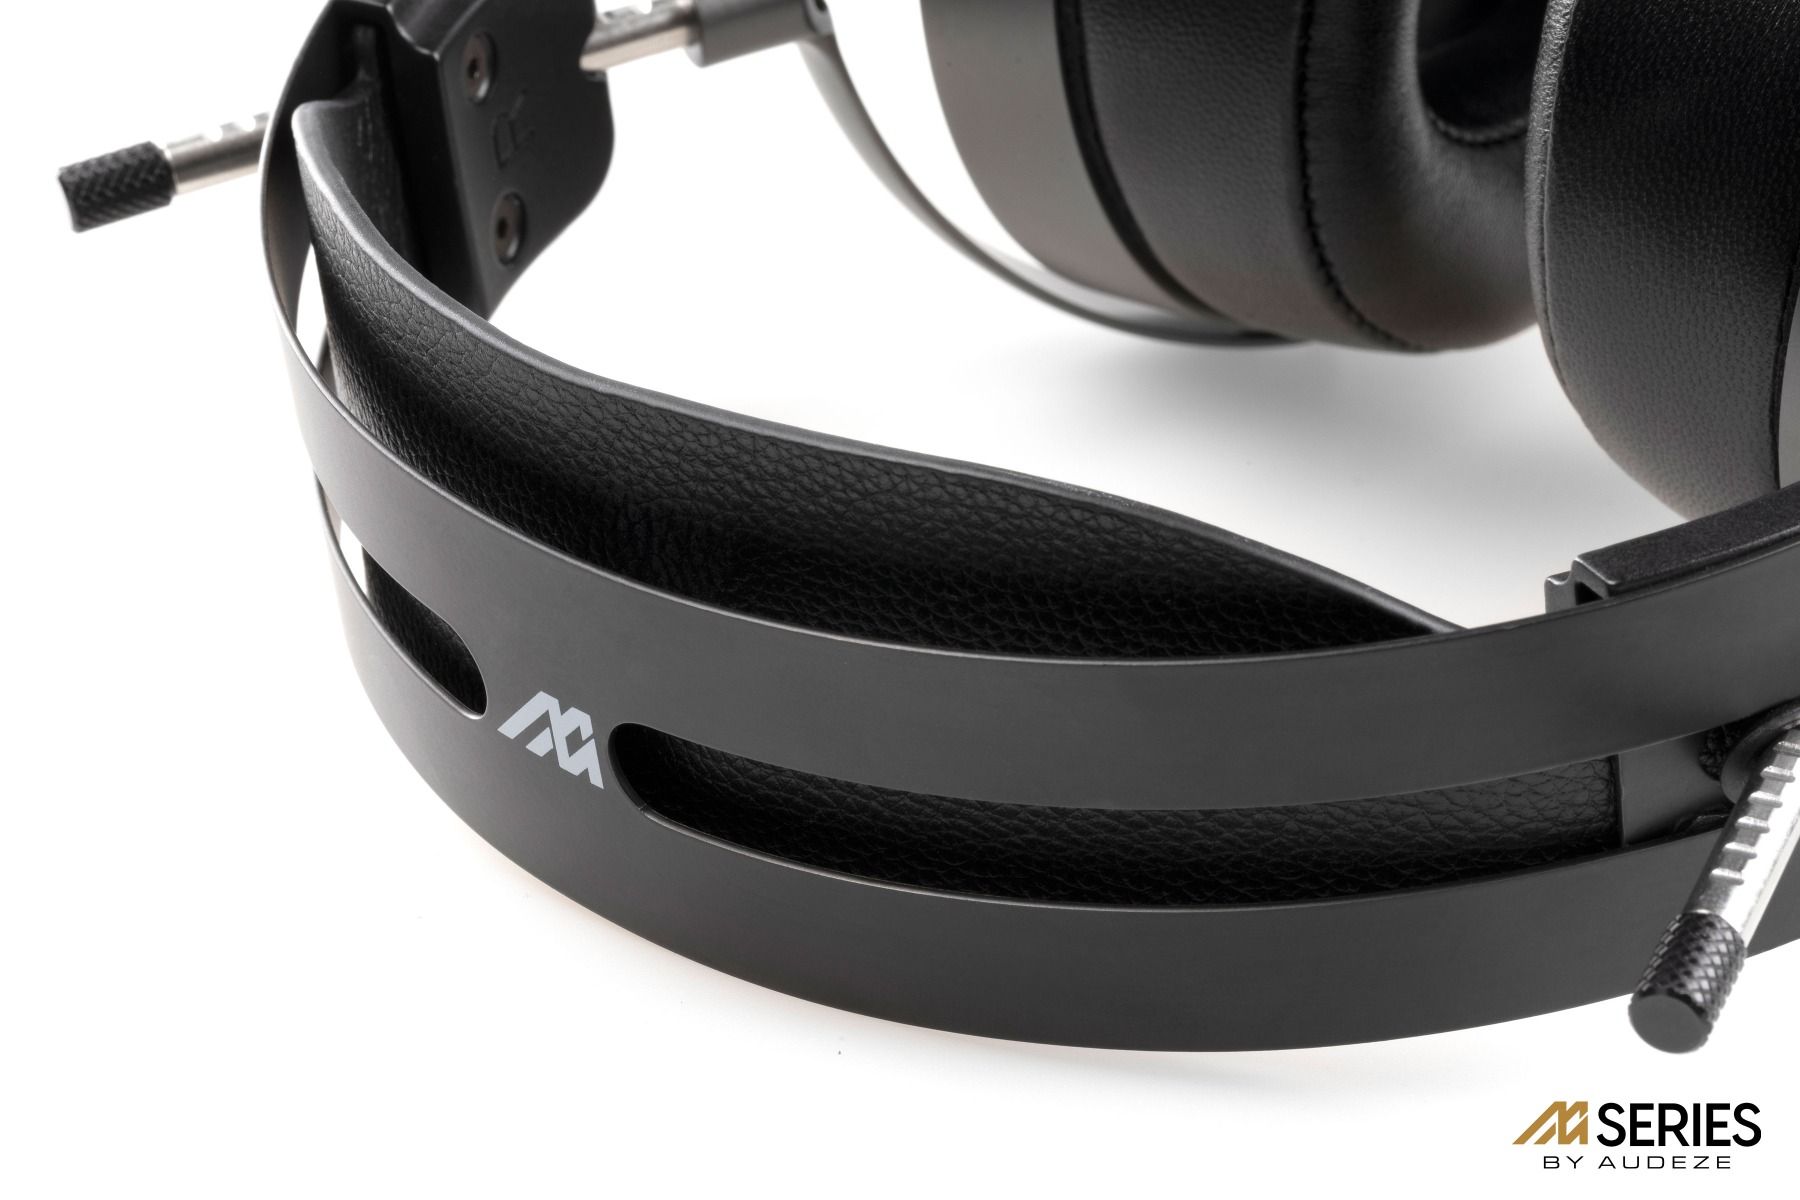 Close-up view of Audeze MM-500 Open-back Planar Magnetic Over-ear headphone's headband in black color.